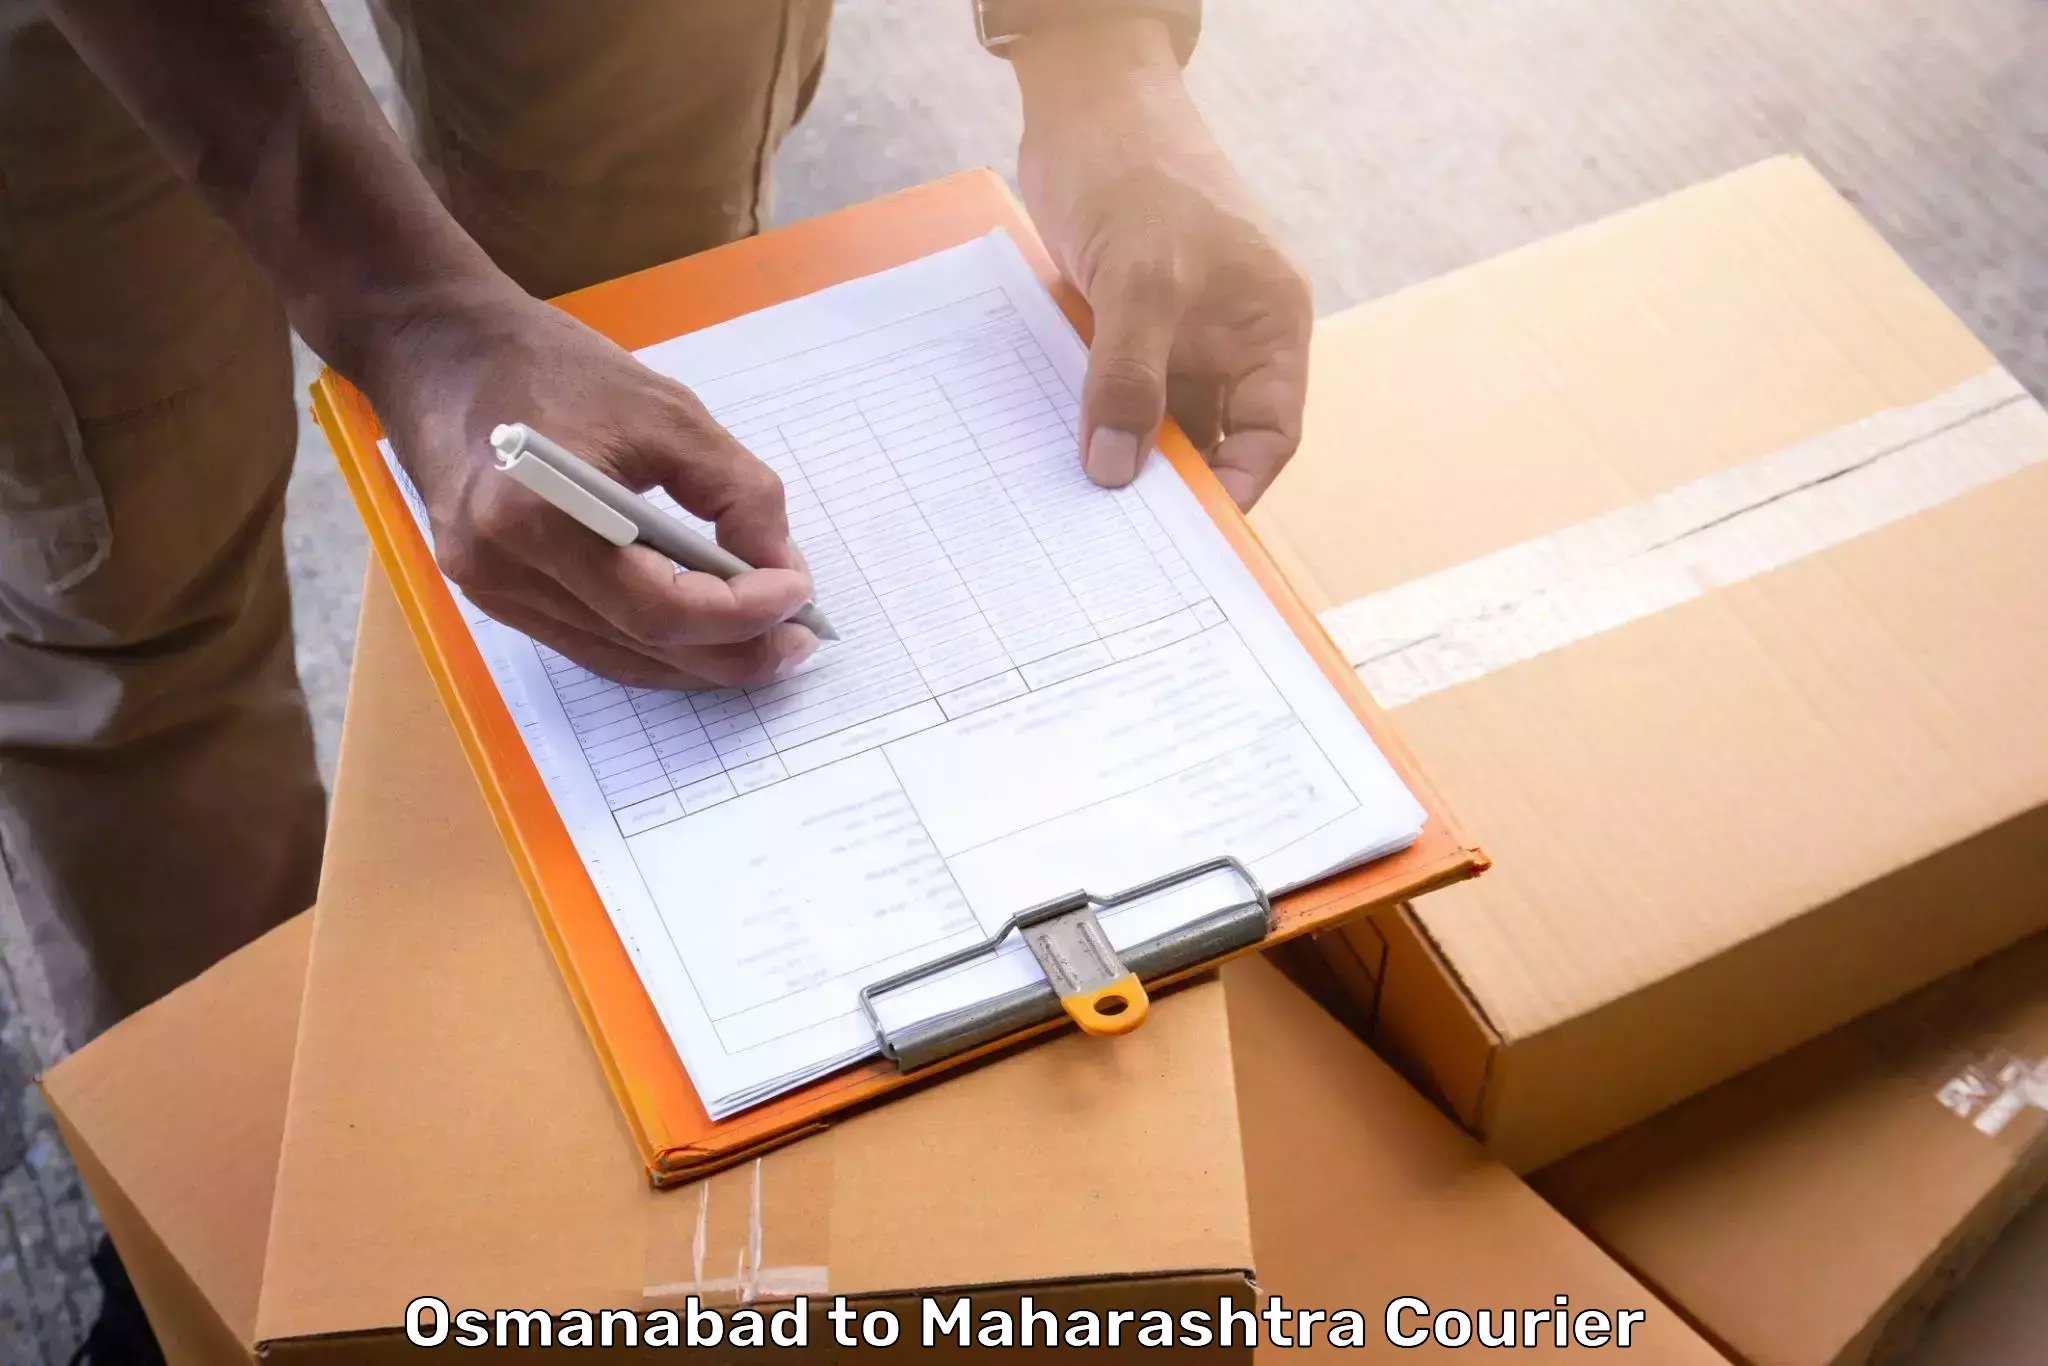 Instant baggage transport quote Osmanabad to Kolhapur